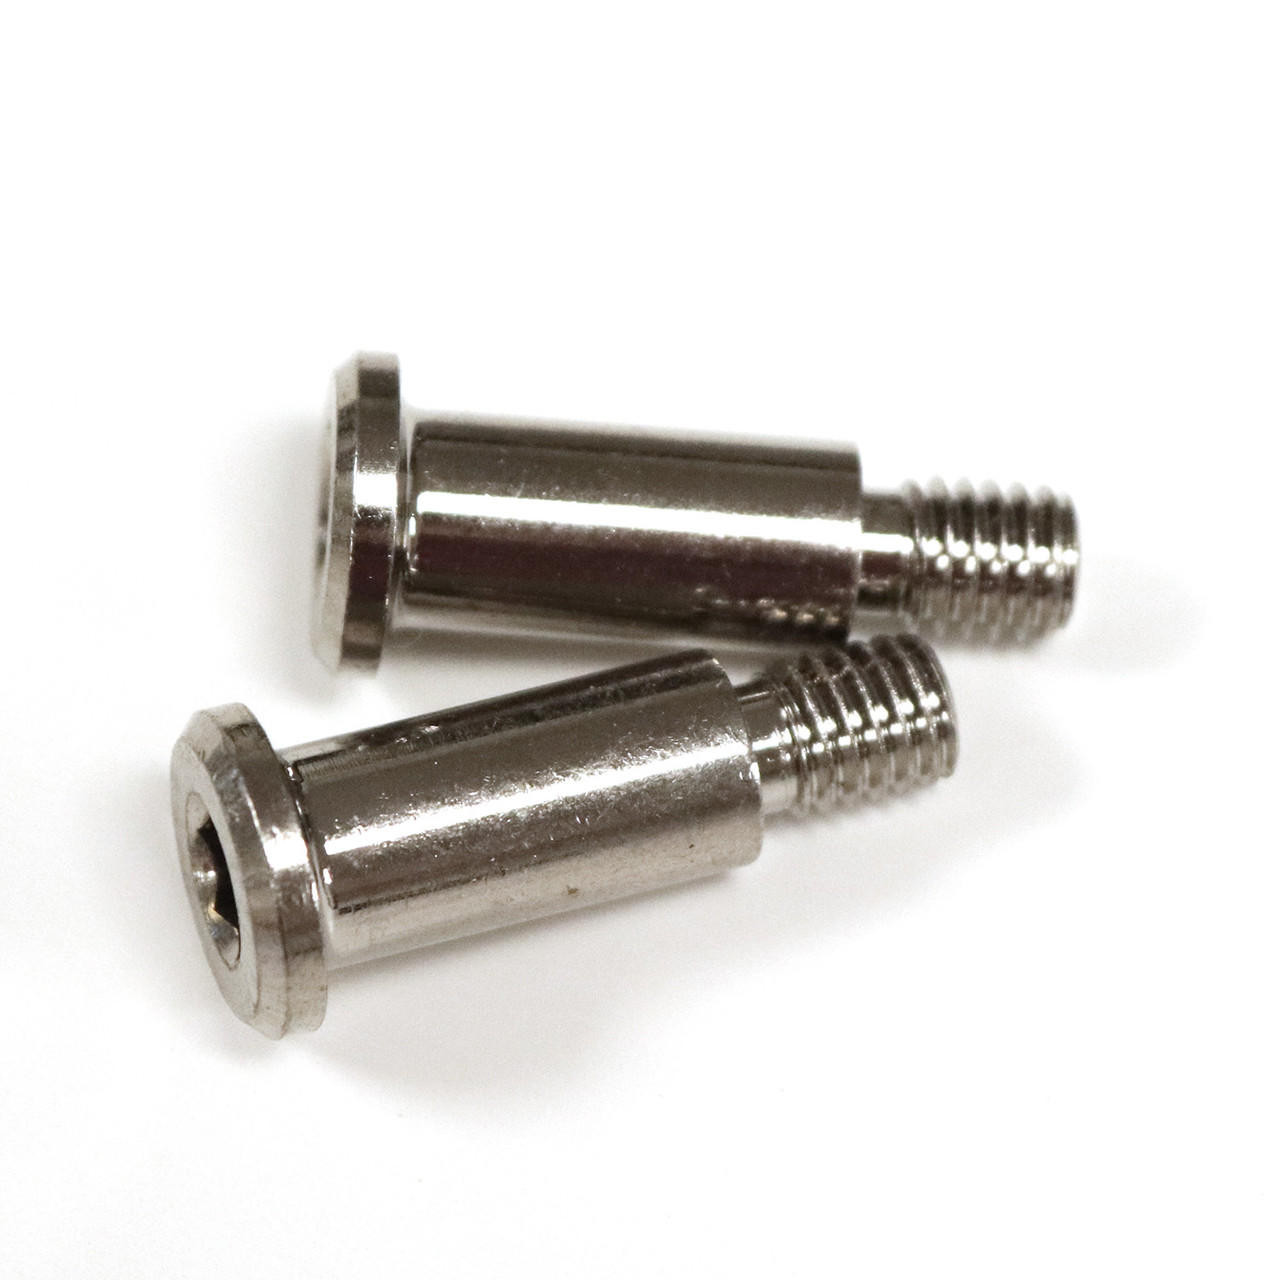 Standoff Screw for A-dec 300 400 and 500 Delivery System - R